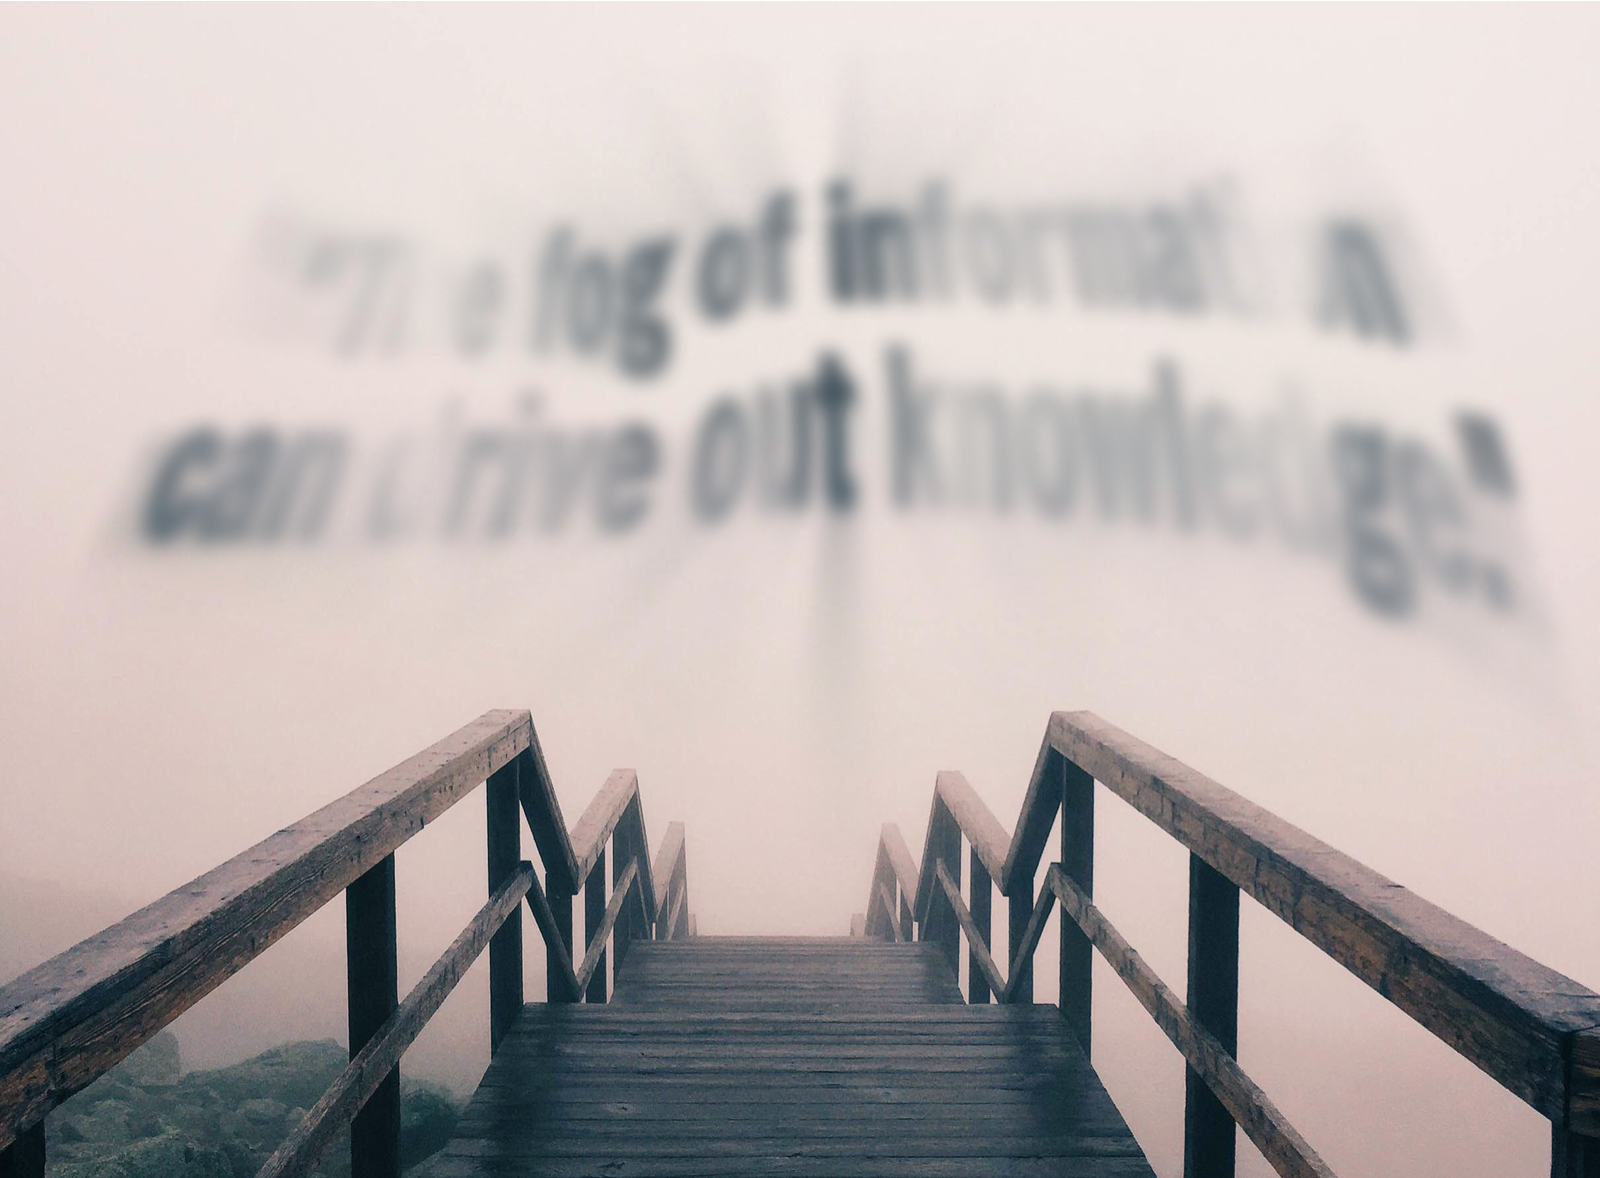 ...but the fog of information can drive out knowledge."